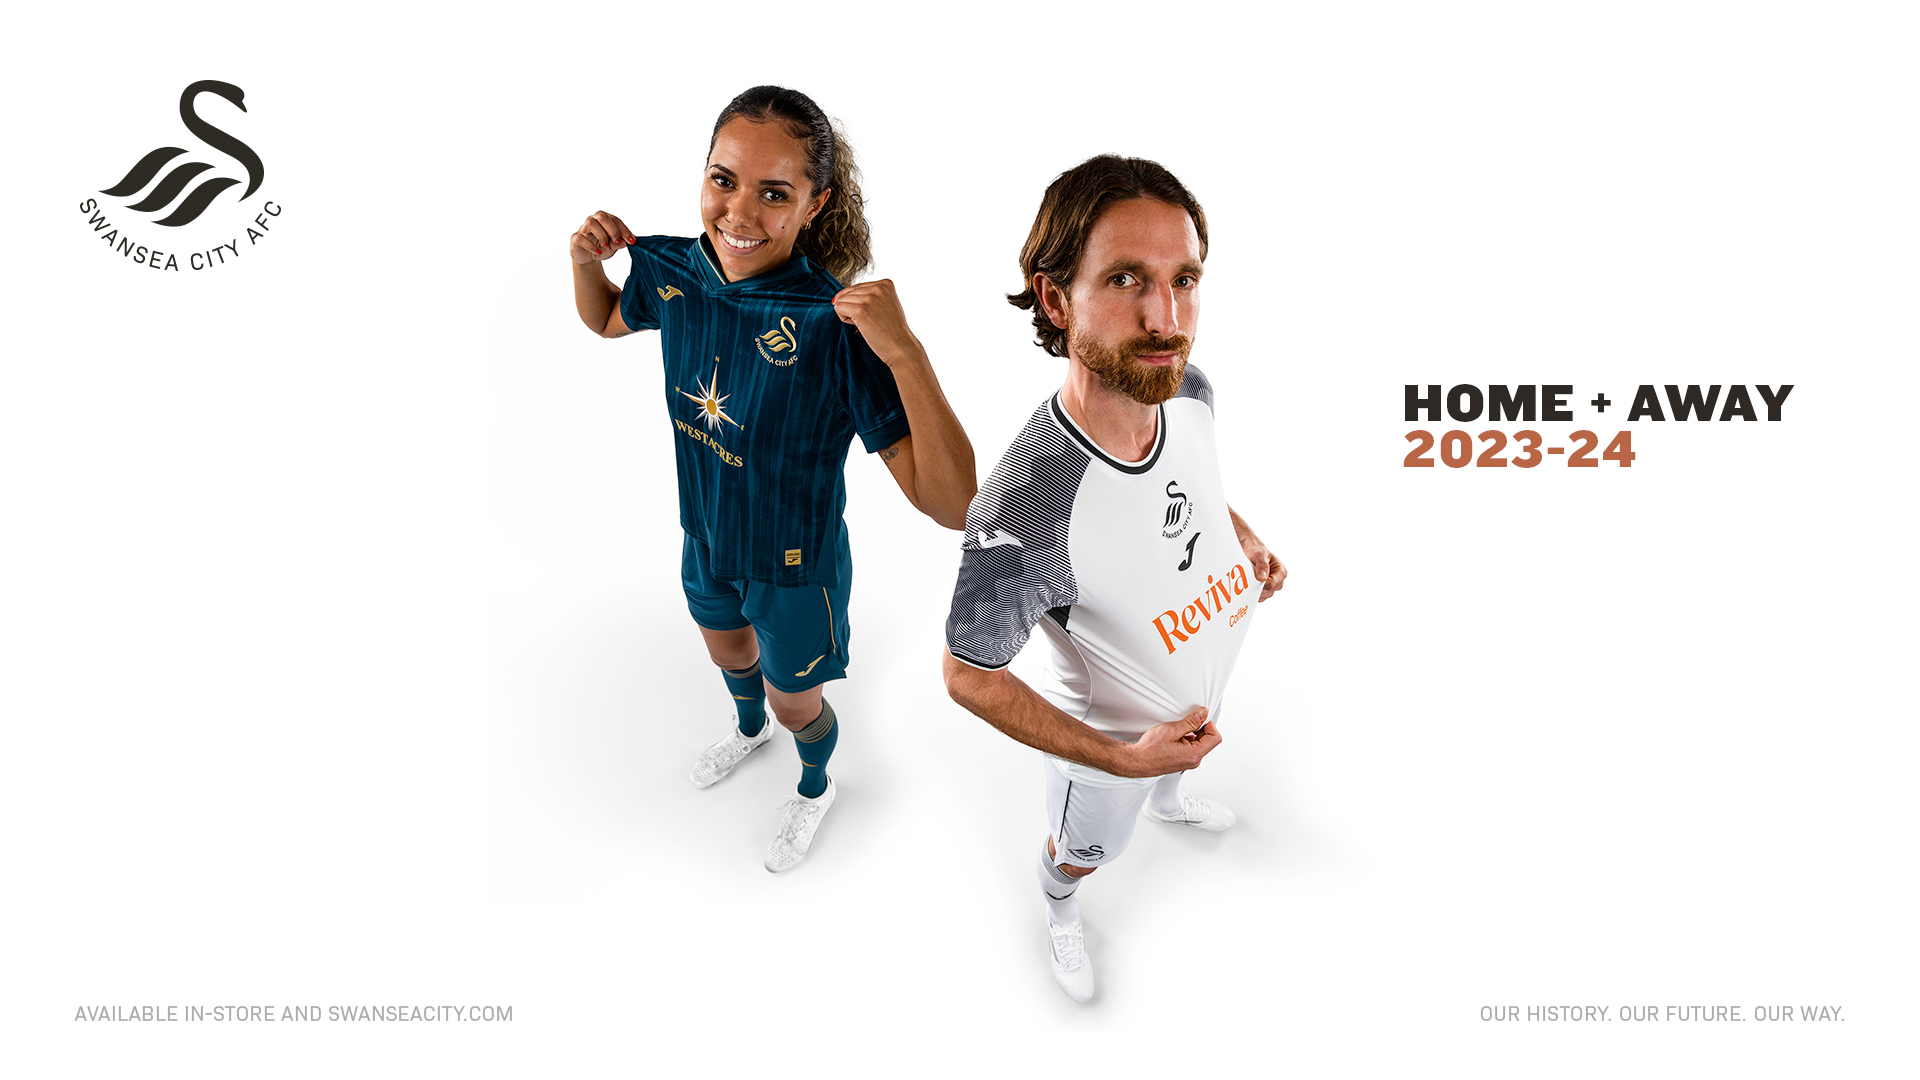 Our new home kit for the 2023/24 season is now available